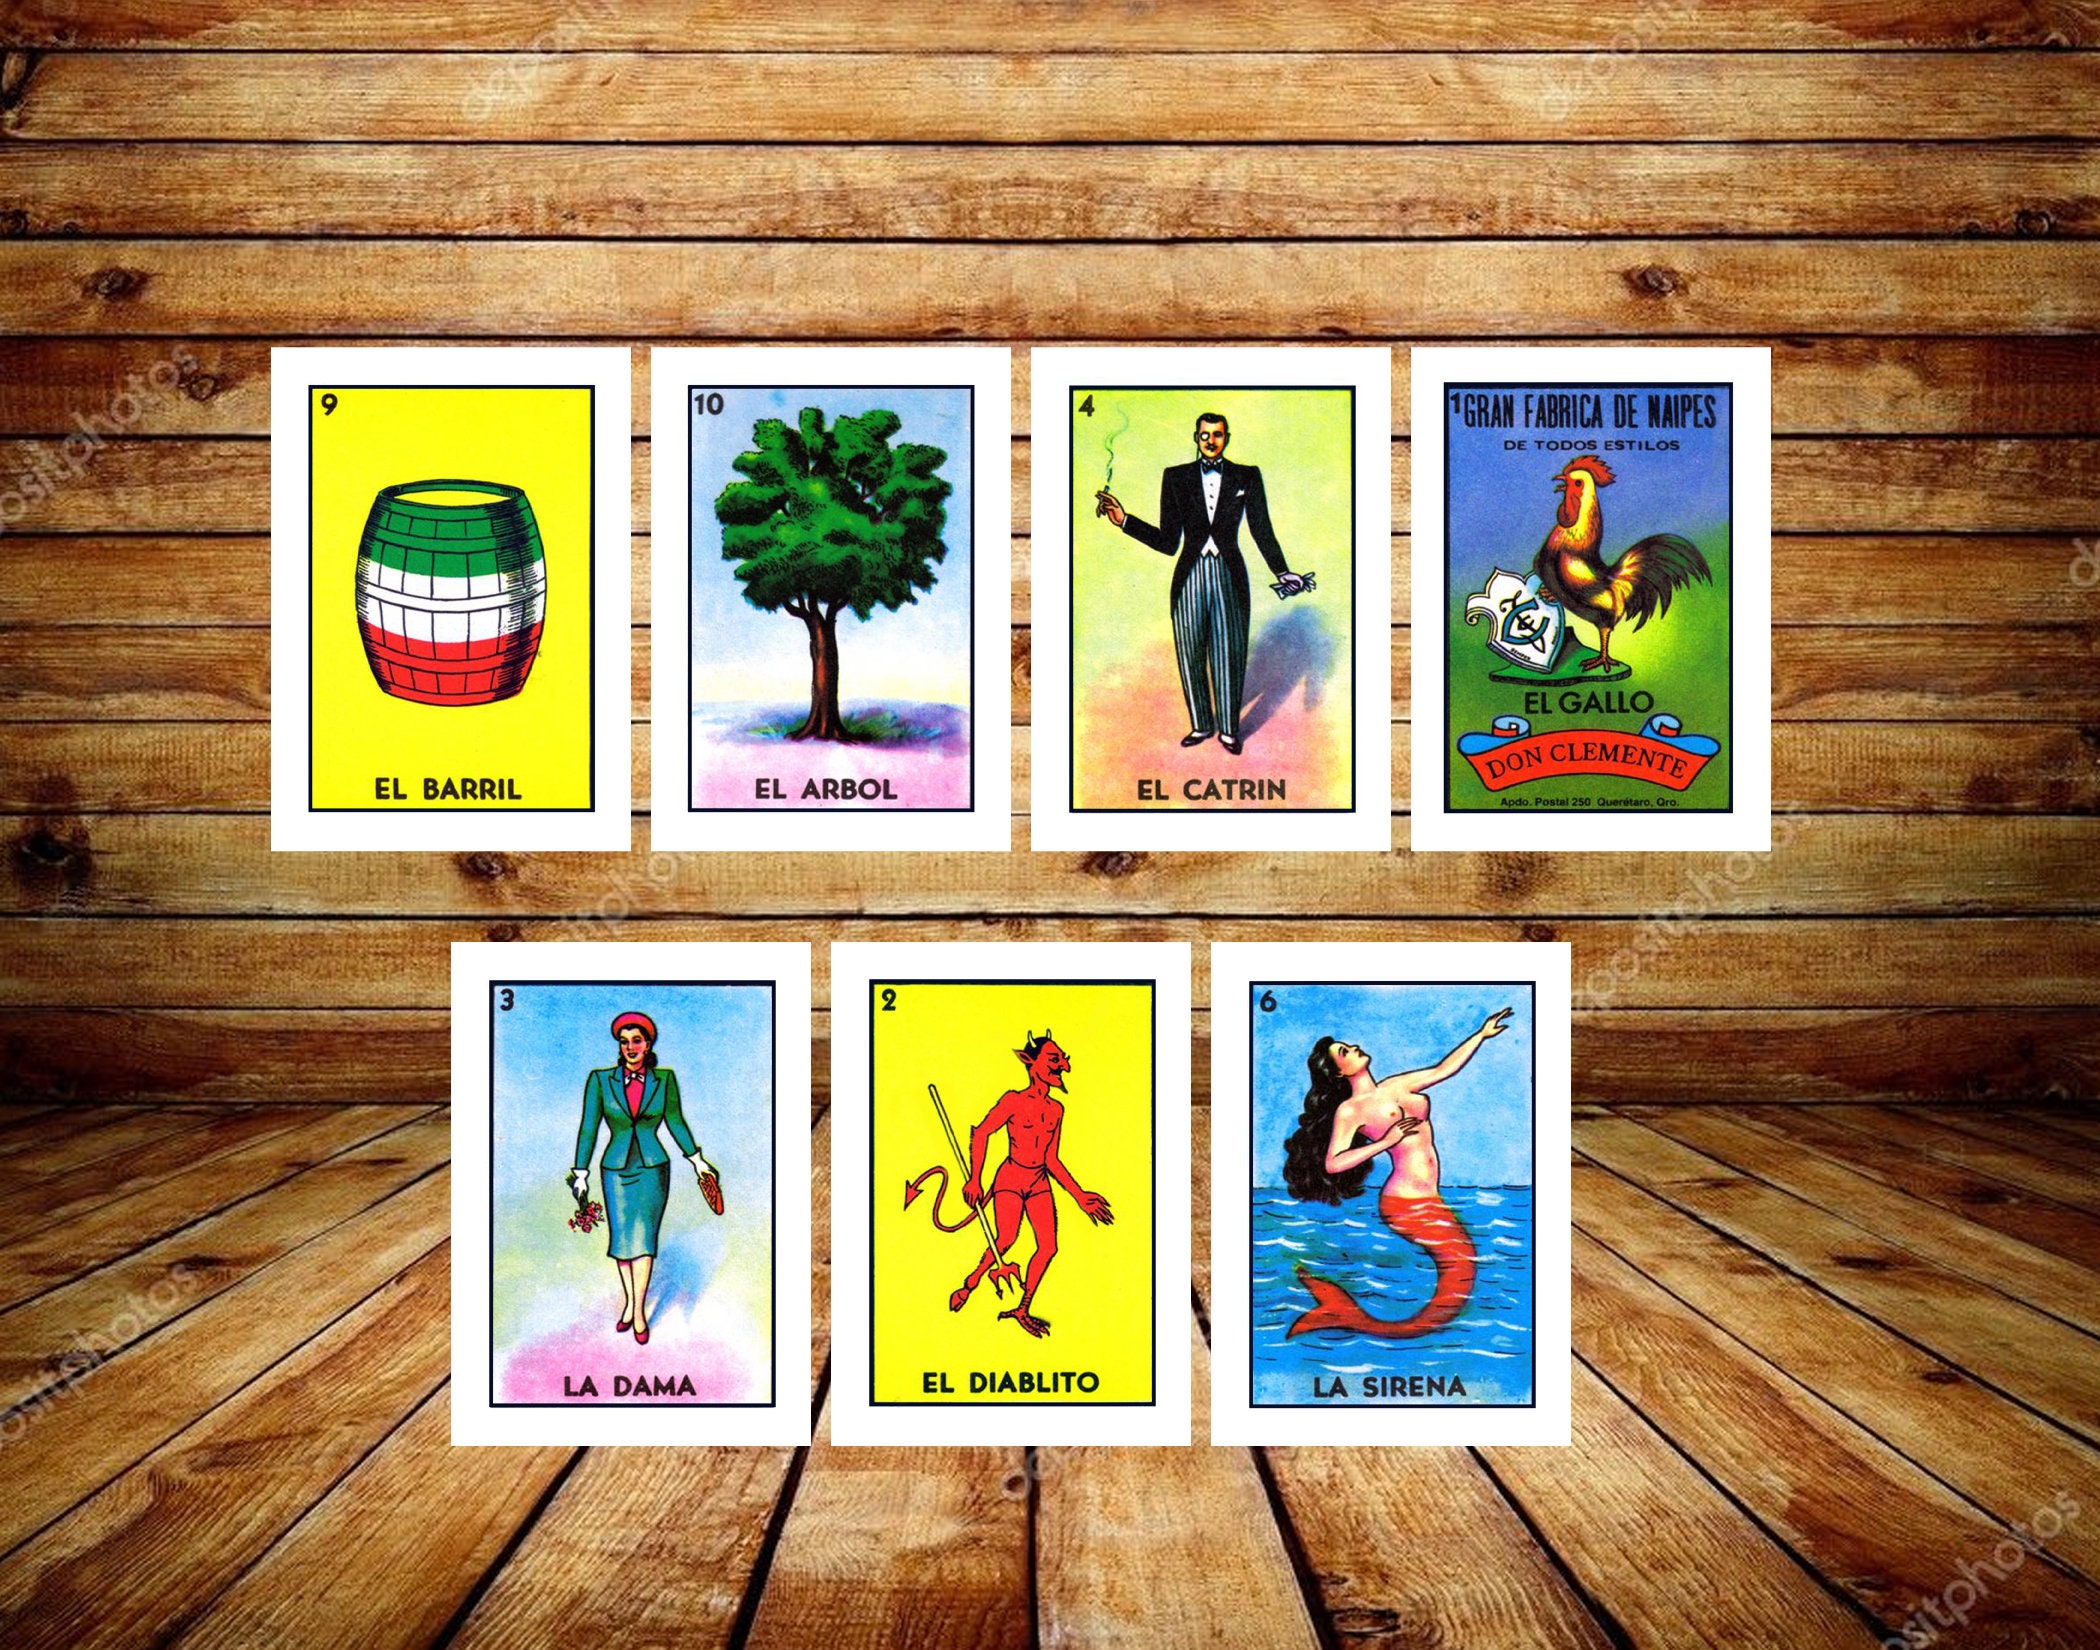 Loteria Mexicana El Nopal Holographic Sticker Decal 3.5 x 2.5 in.